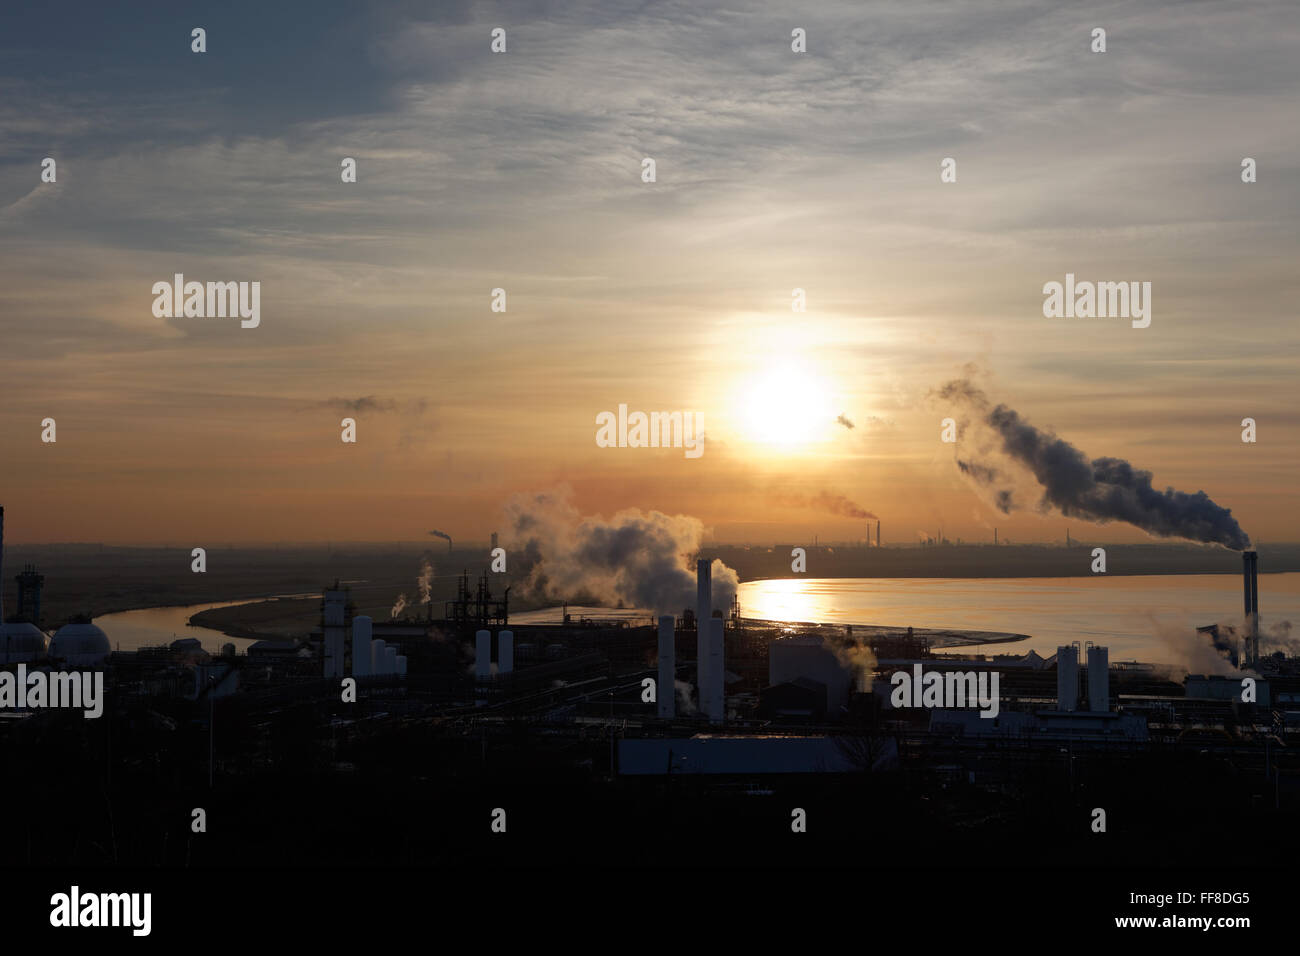 Landscape, industrial, smoking, chimneys, sunset, mersey, estuary, water, chemical, plant, pollution, environment,heavy industry Stock Photo